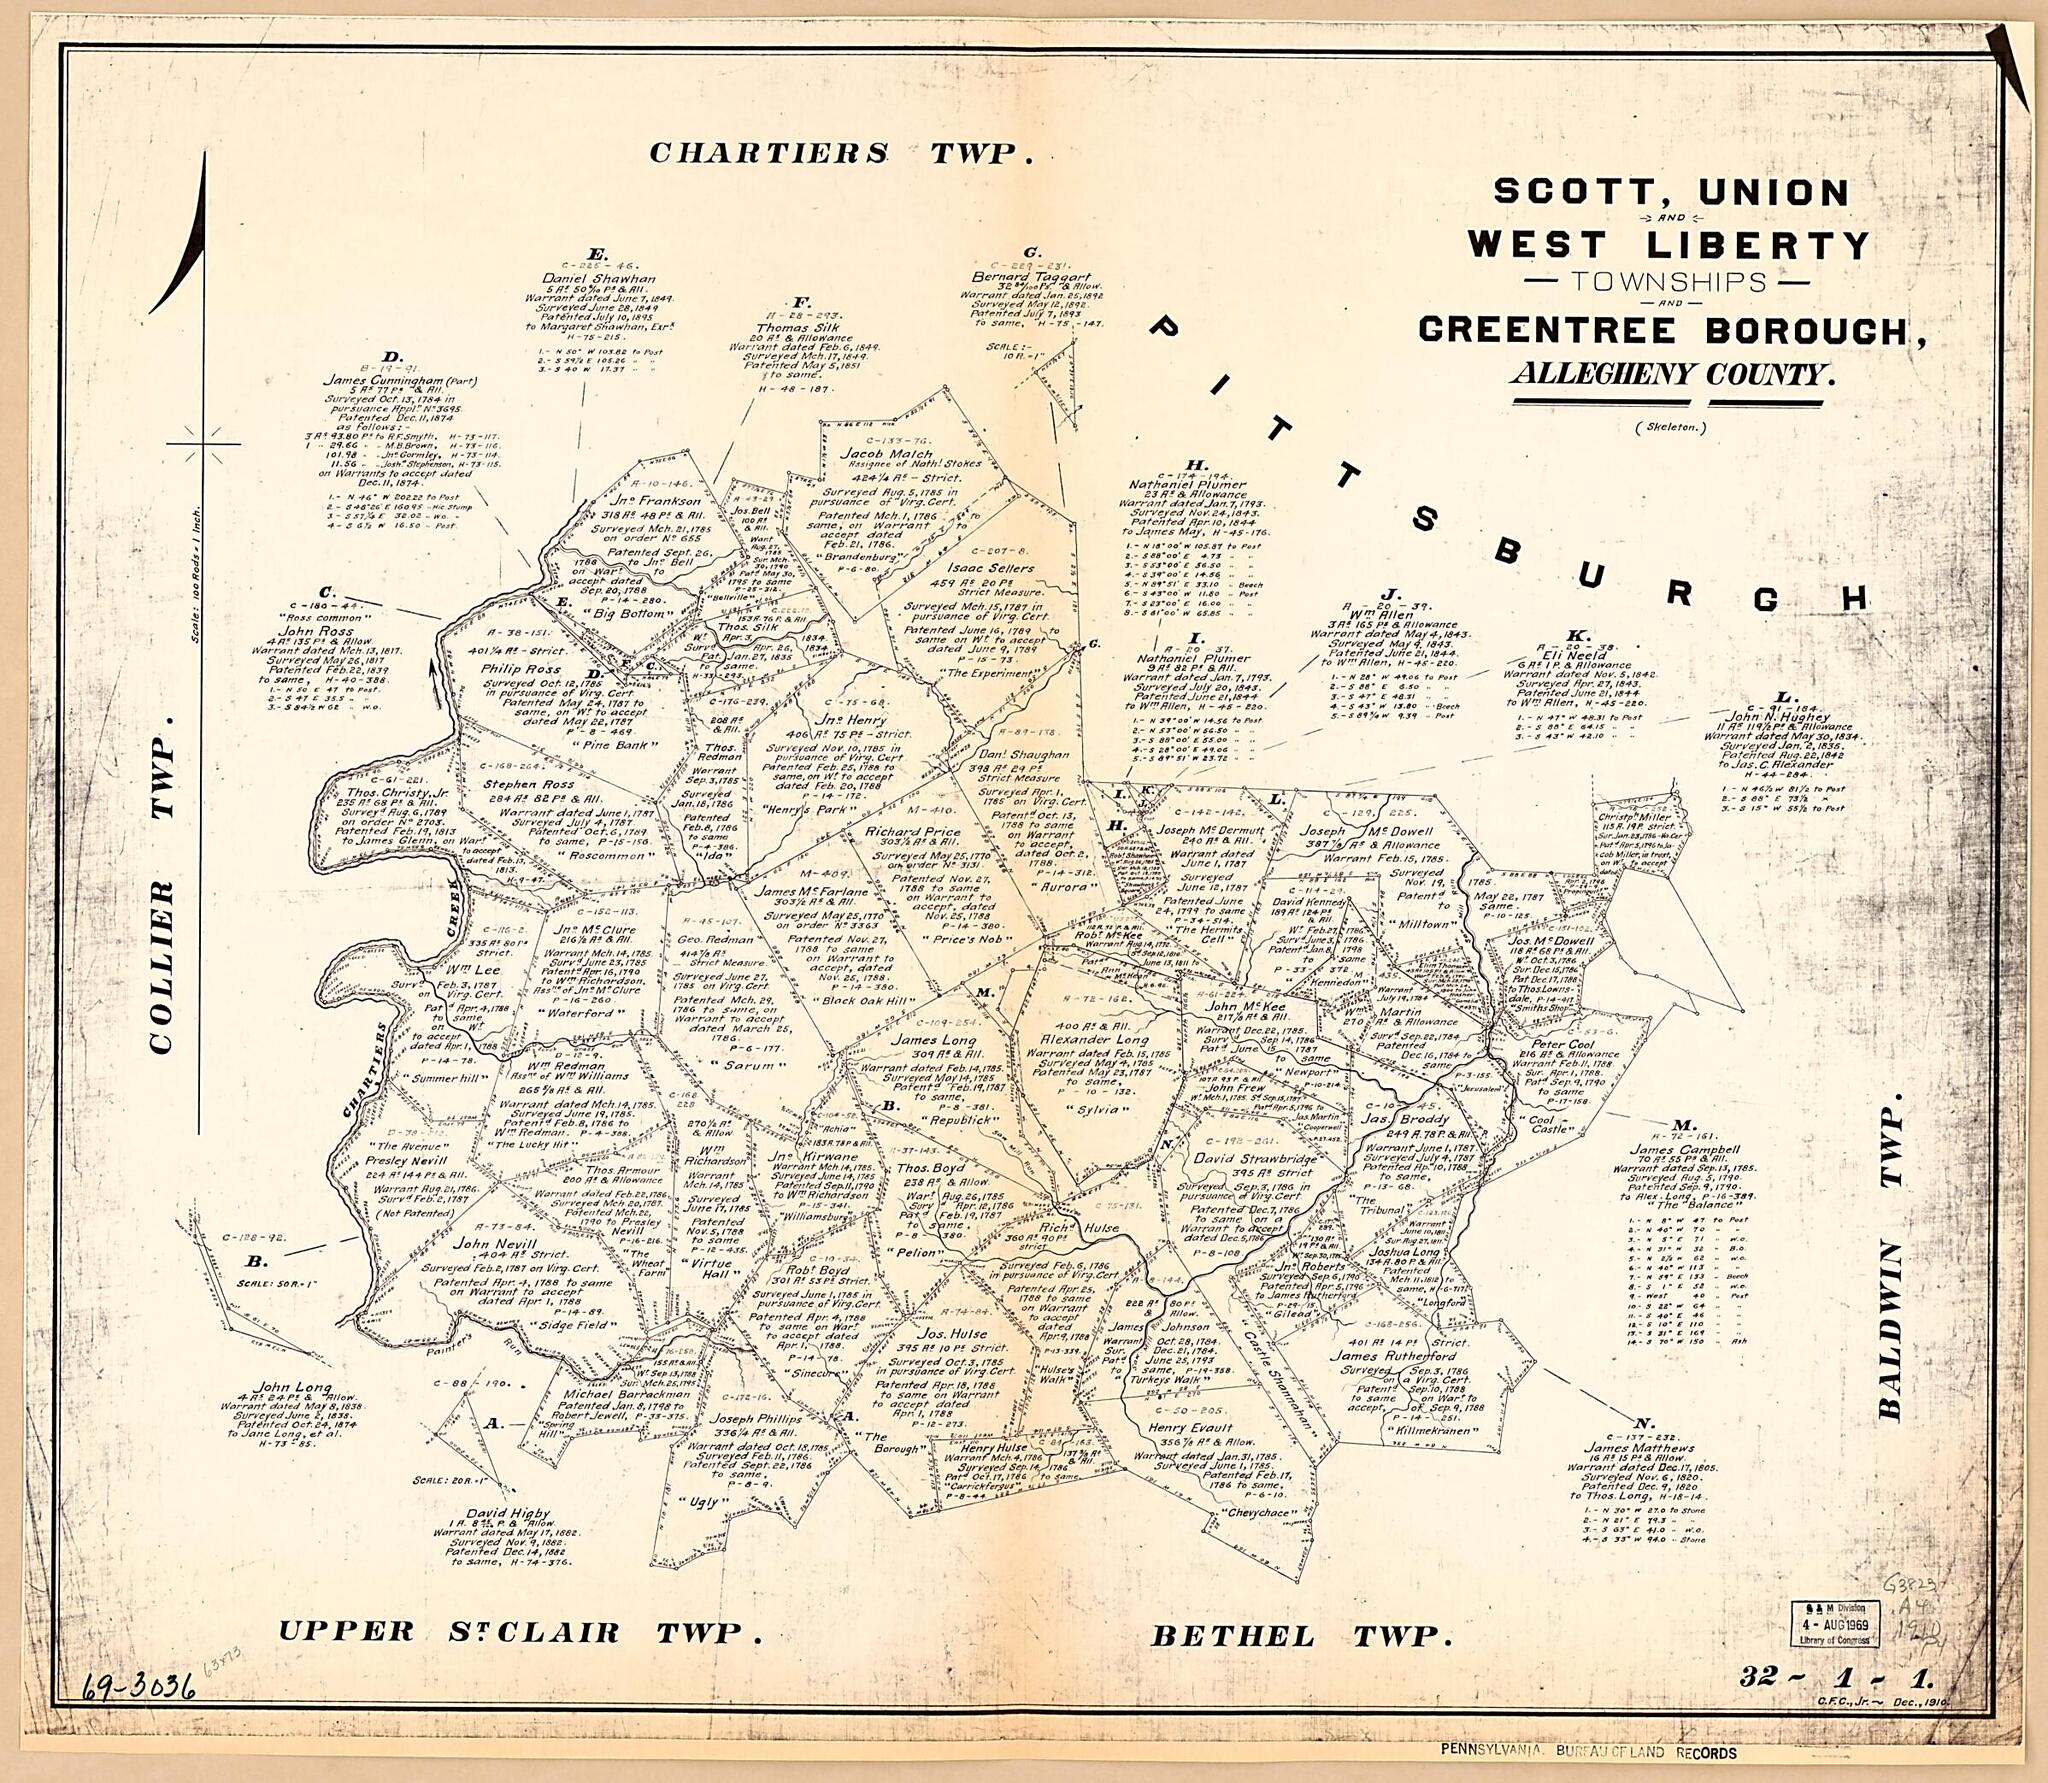 This old map of Scott, Union and West Liberty Townships and Greentree Borough, Allegheny County. (Skeleton) from 1910 was created by  Pennsylvania. Bureau of Land Records in 1910